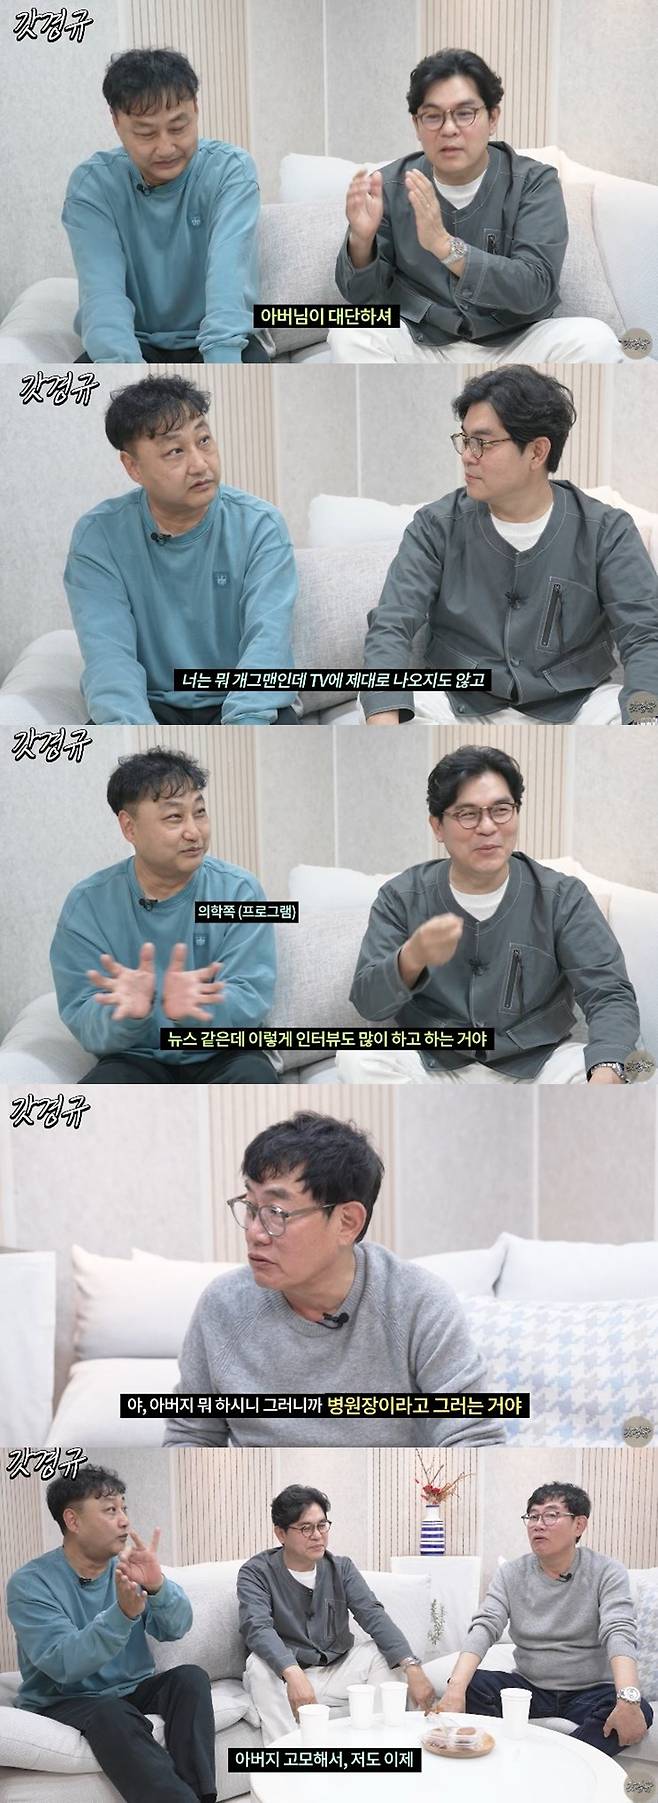 Comedian Kim Soo-yong talked about the house.On November 29, Lee Kyung-kyu  ⁇  Lee Kyung-kyu  ⁇  Lee Kyung-kyu x Kim Yong-man, Kim Soo-yong (feat. Kim Soo-yong) .On this day, Kim Soo-yong revealed his family and attracted attention. Lee Kyung-kyu first asked what Father was doing. Father said that he was the President of the Hospital.Kim Yong-man said, My father is great. My father served as a hospital president. In the early days of Comedian, Father suddenly asked me to see him.Kim Soo-yong said, In the early days of Comedian, Father suddenly asked me to watch, Youre a Comedian and youre not on TV. Youre less out than me.My father was in a lot of medical counseling programs, he said.He said, Father Hal is also a doctor. (So) Father, even my aunt, tried to succeed him, but (I was not a doctor).